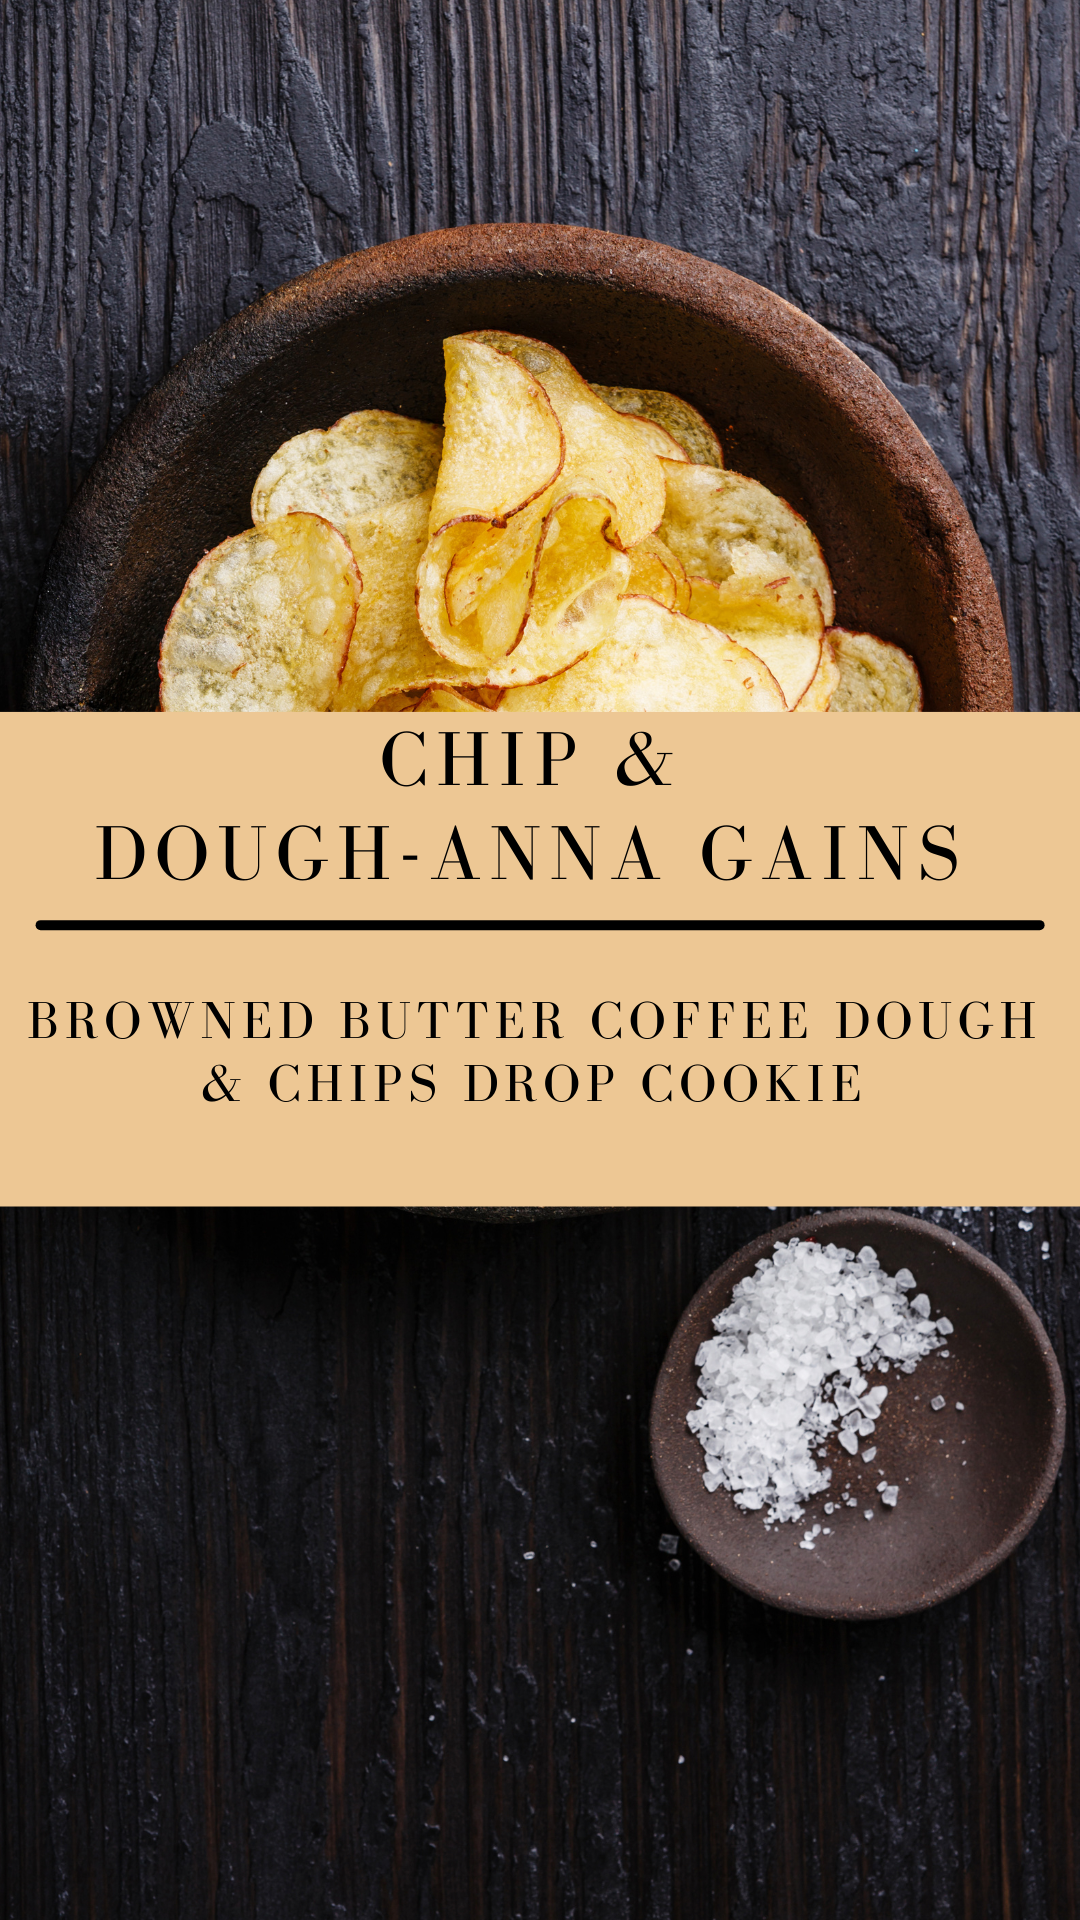 Chip & Dough-Anna Gains: Browned Butter Coffee & Chips Drop Cookie